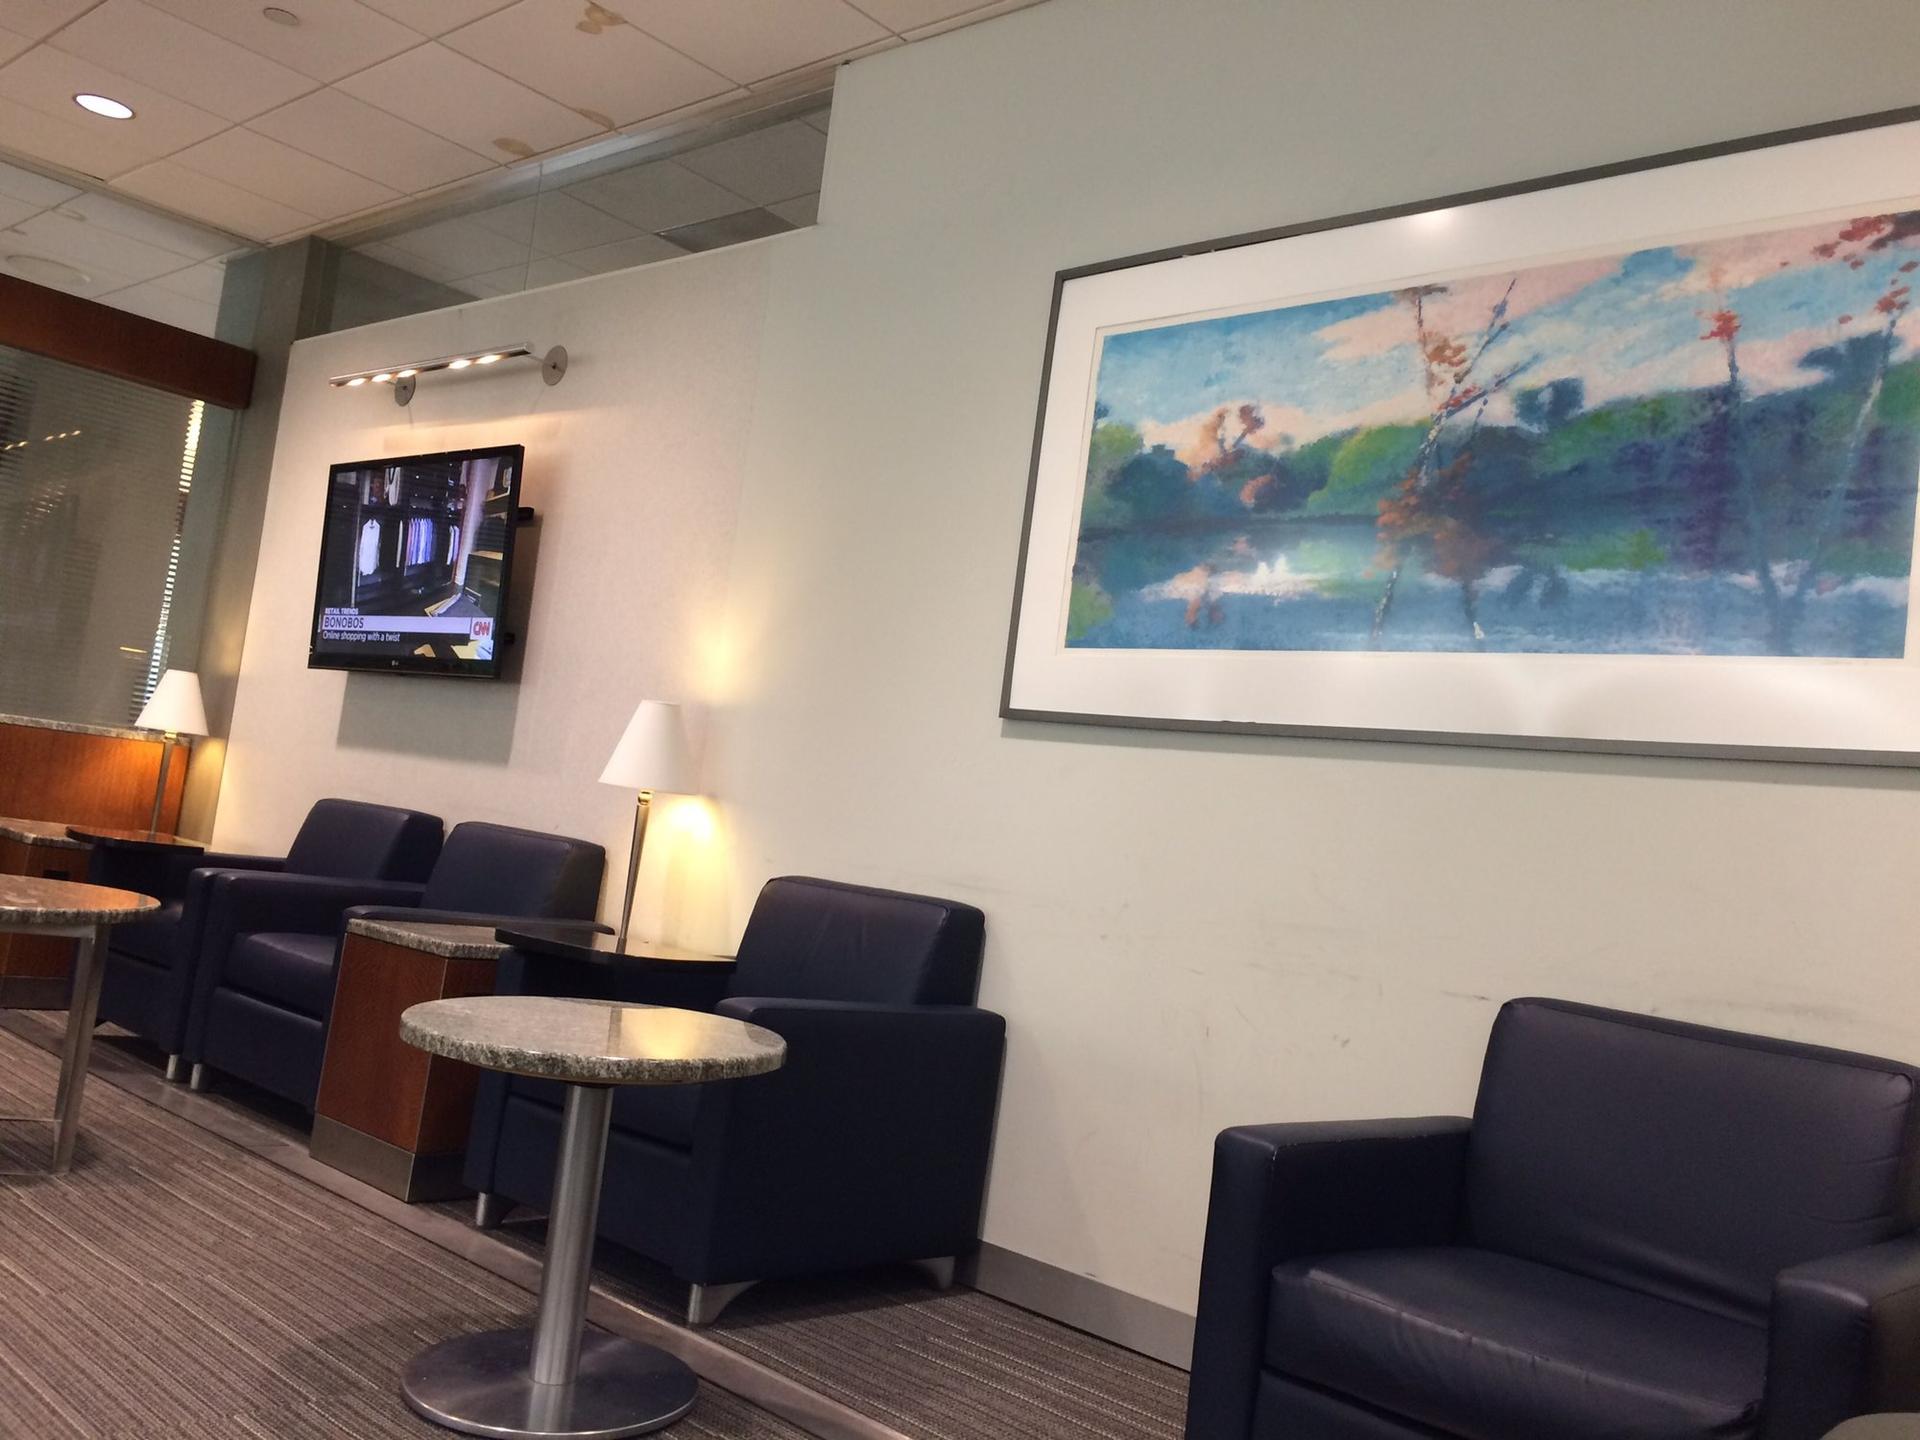 American Airlines Admirals Club image 22 of 48